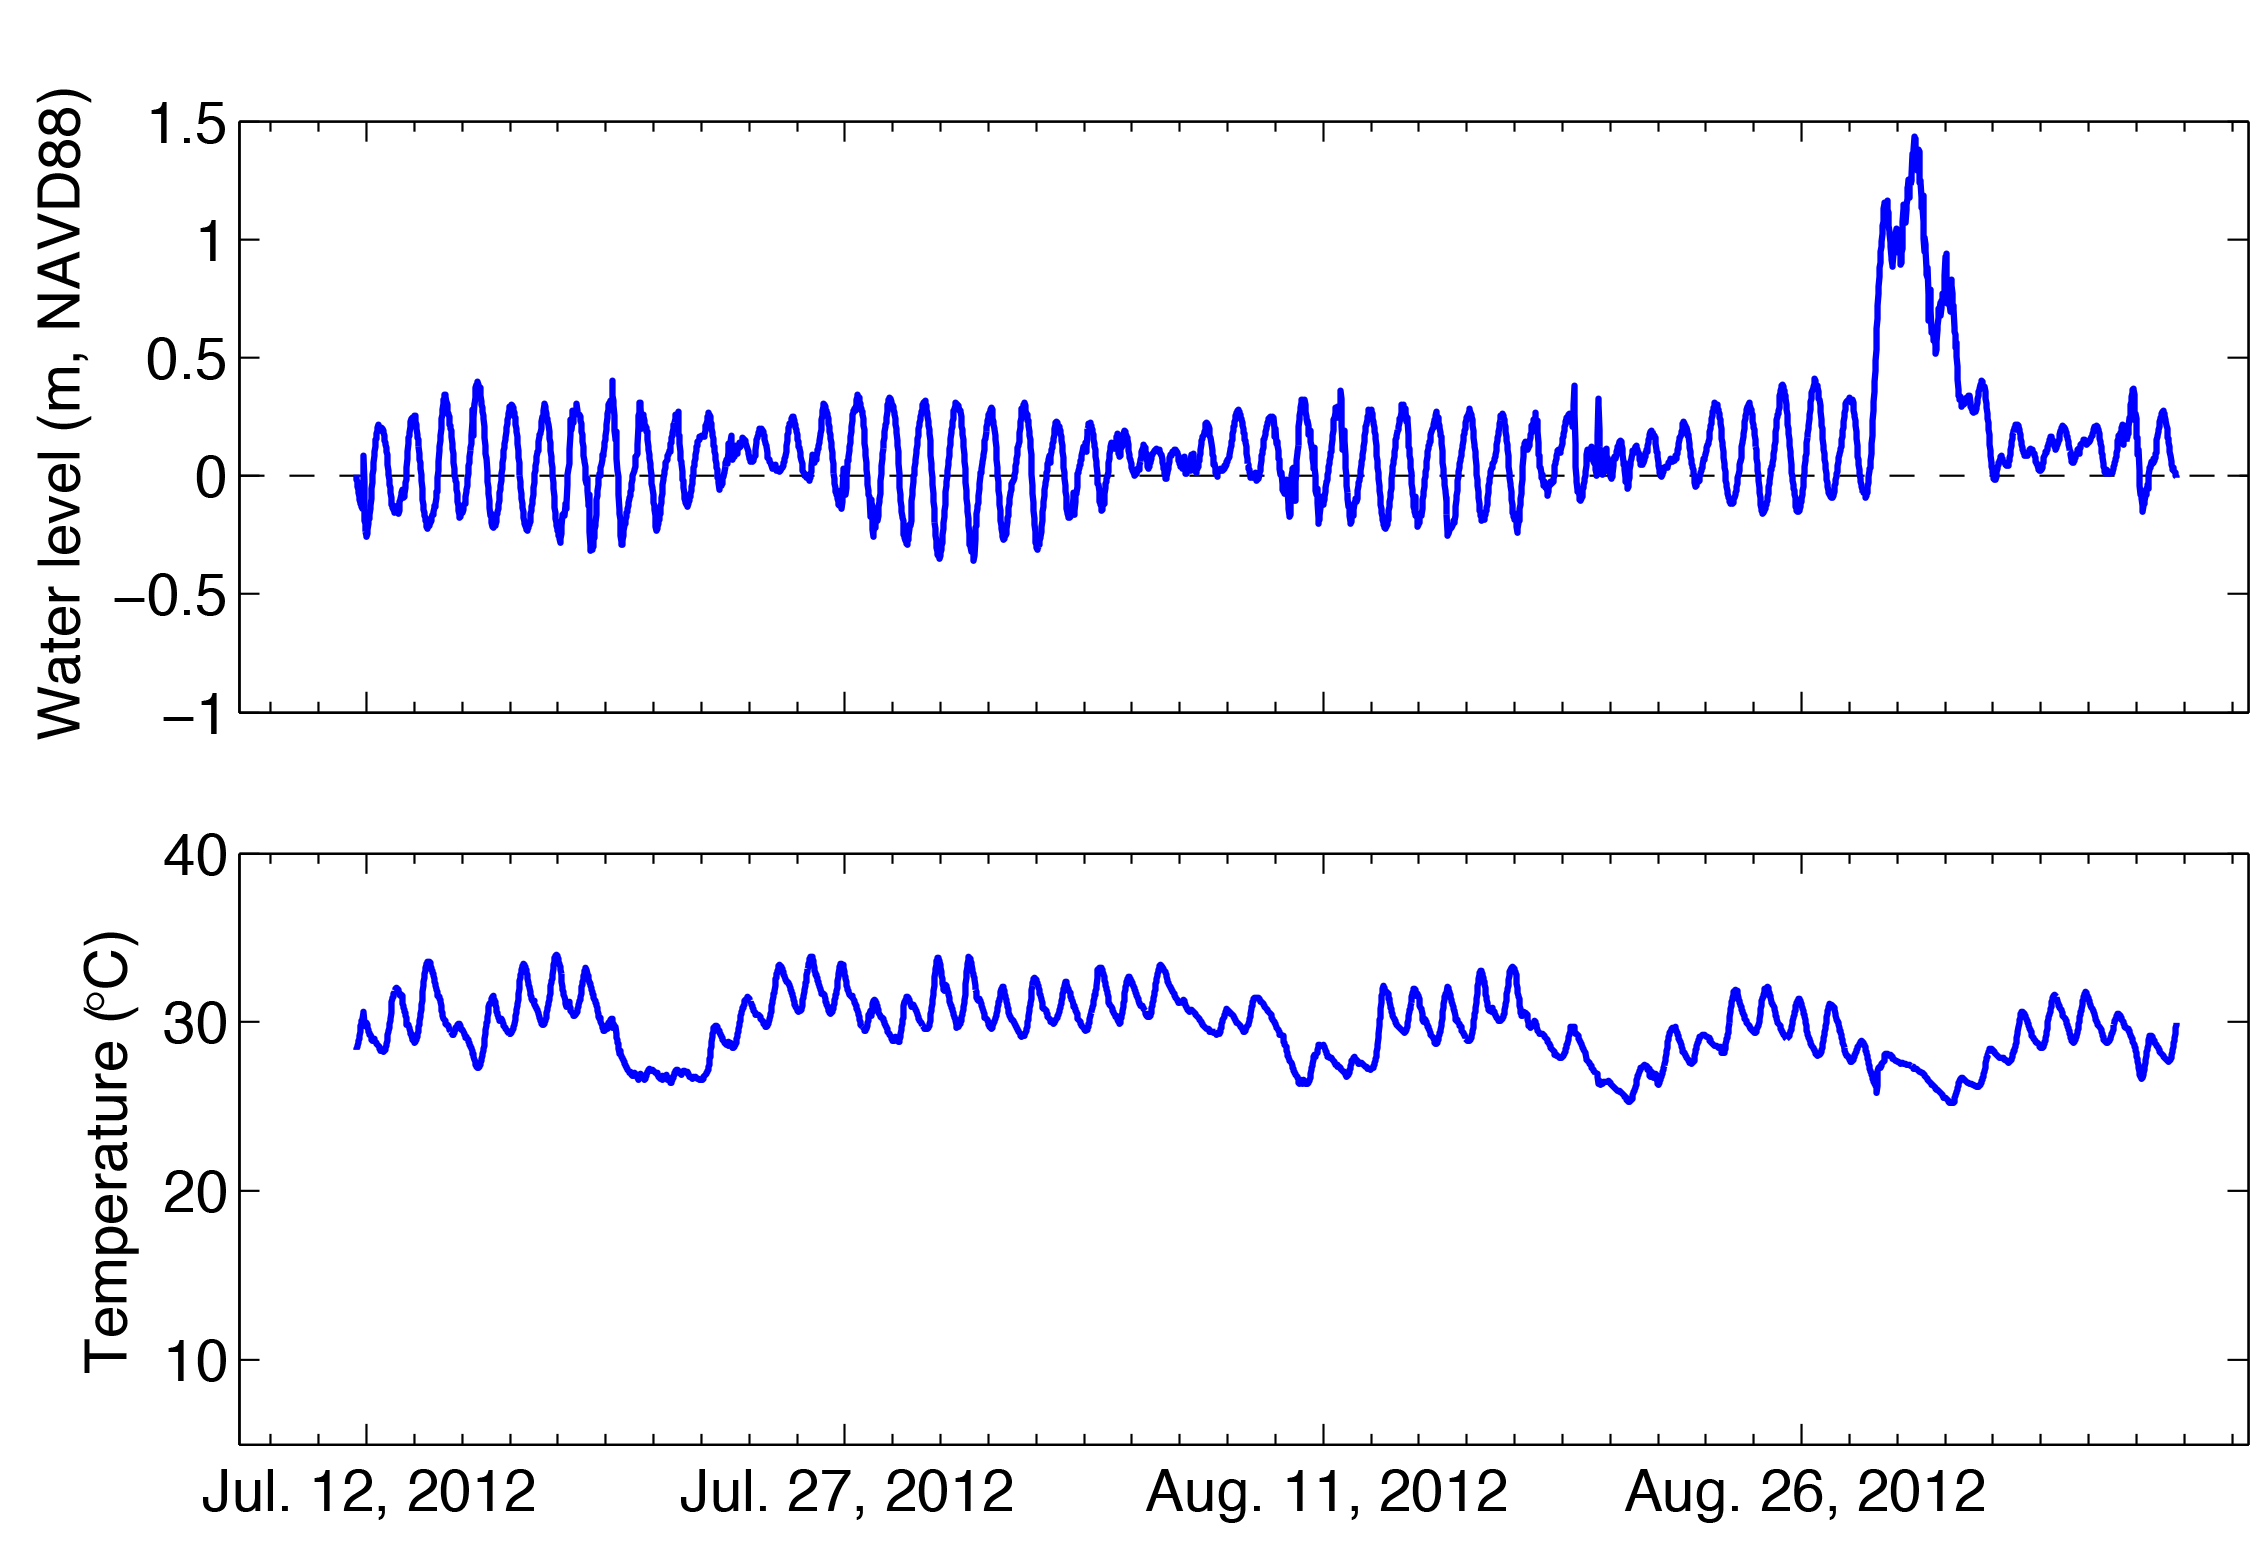 Water level and temperature time series